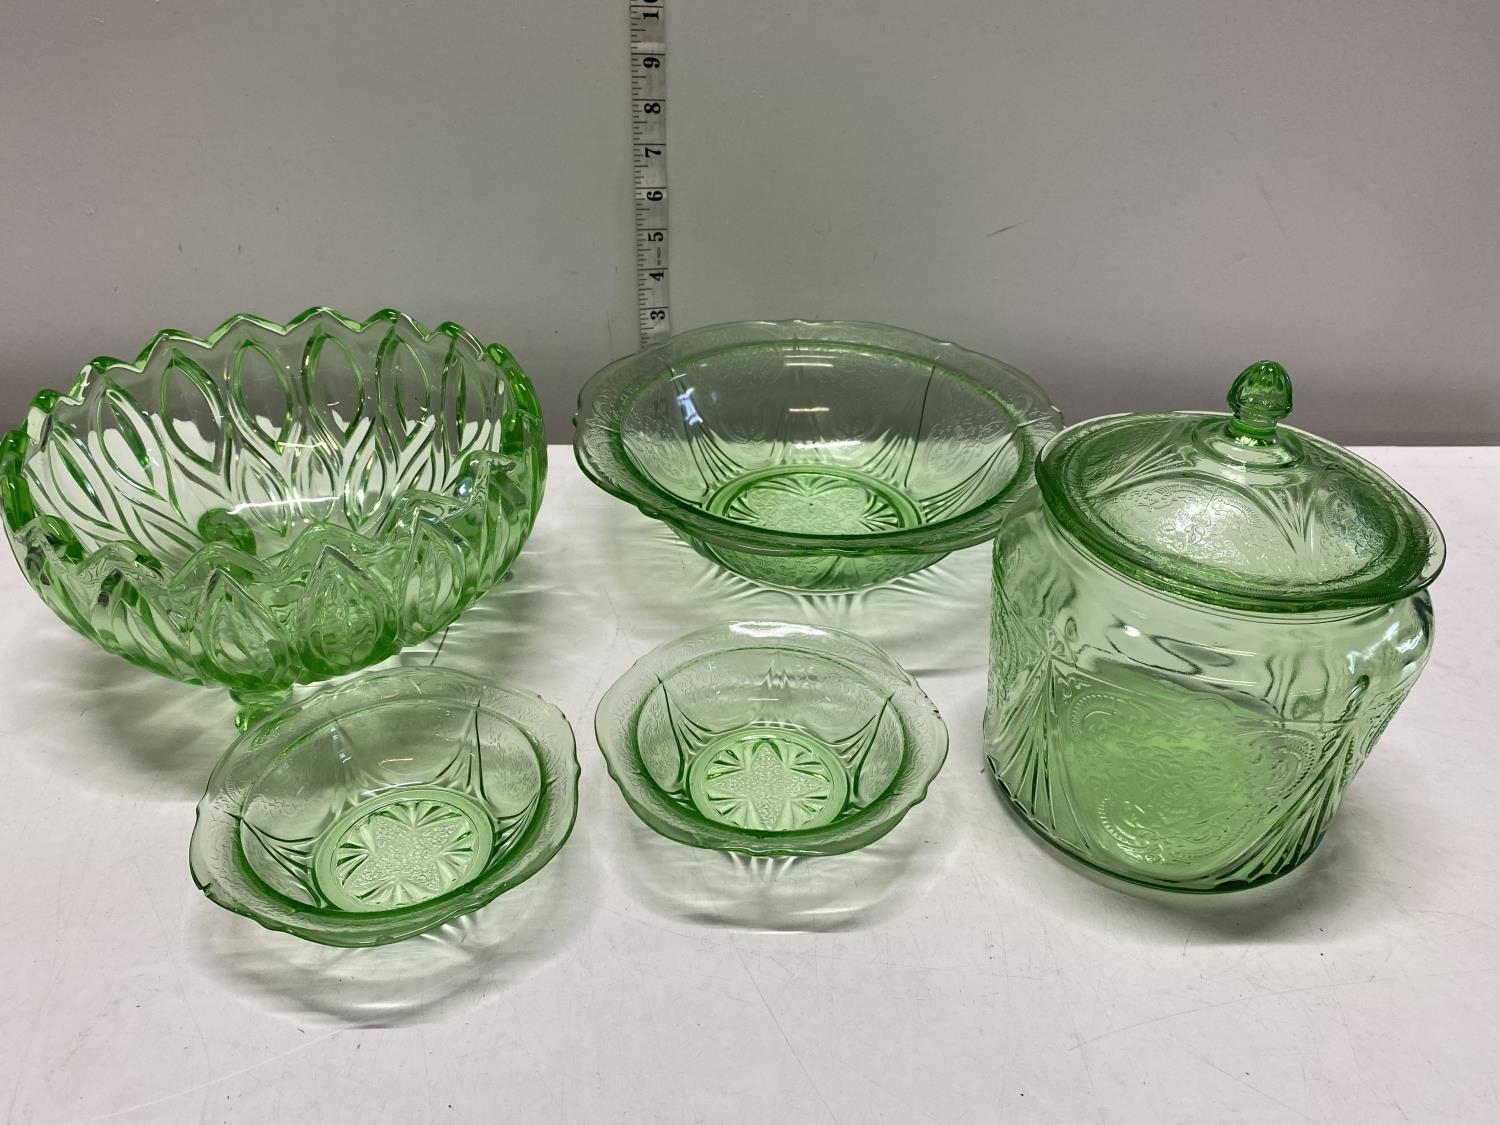 Five pieces of vintage green uranium glass, shipping unavailable